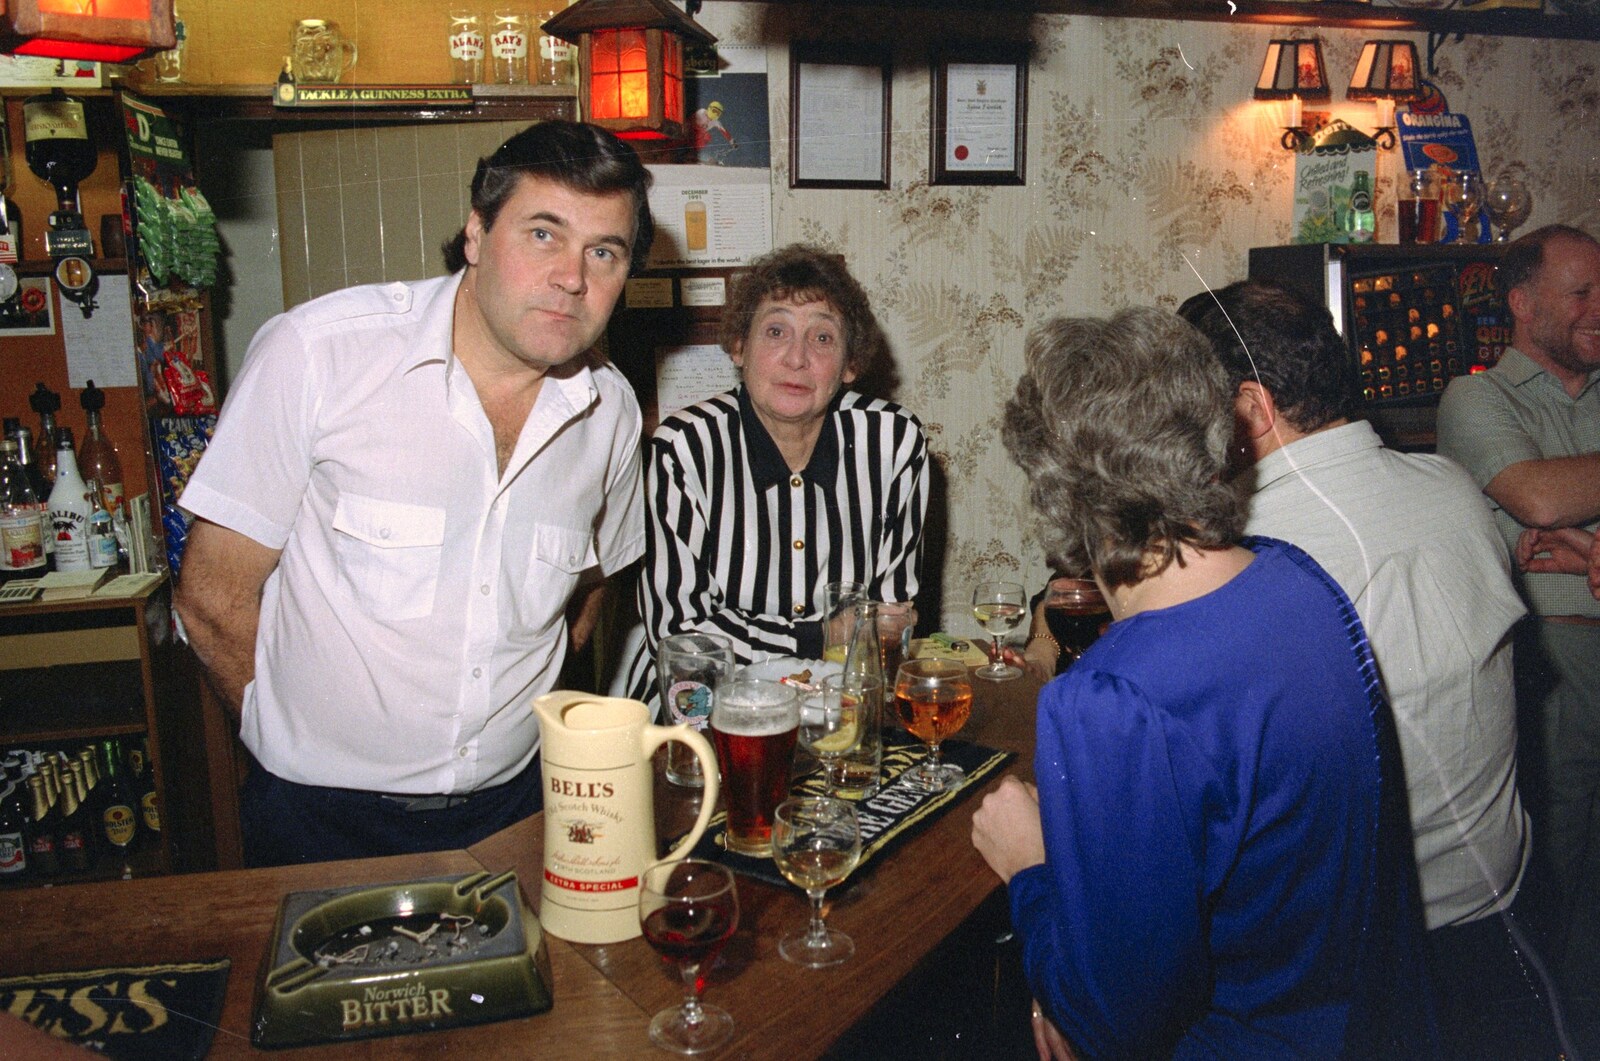 Alan and his mother, Nana from New Year's Eve at the Swan Inn, Brome, Suffolk - 31st December 1991